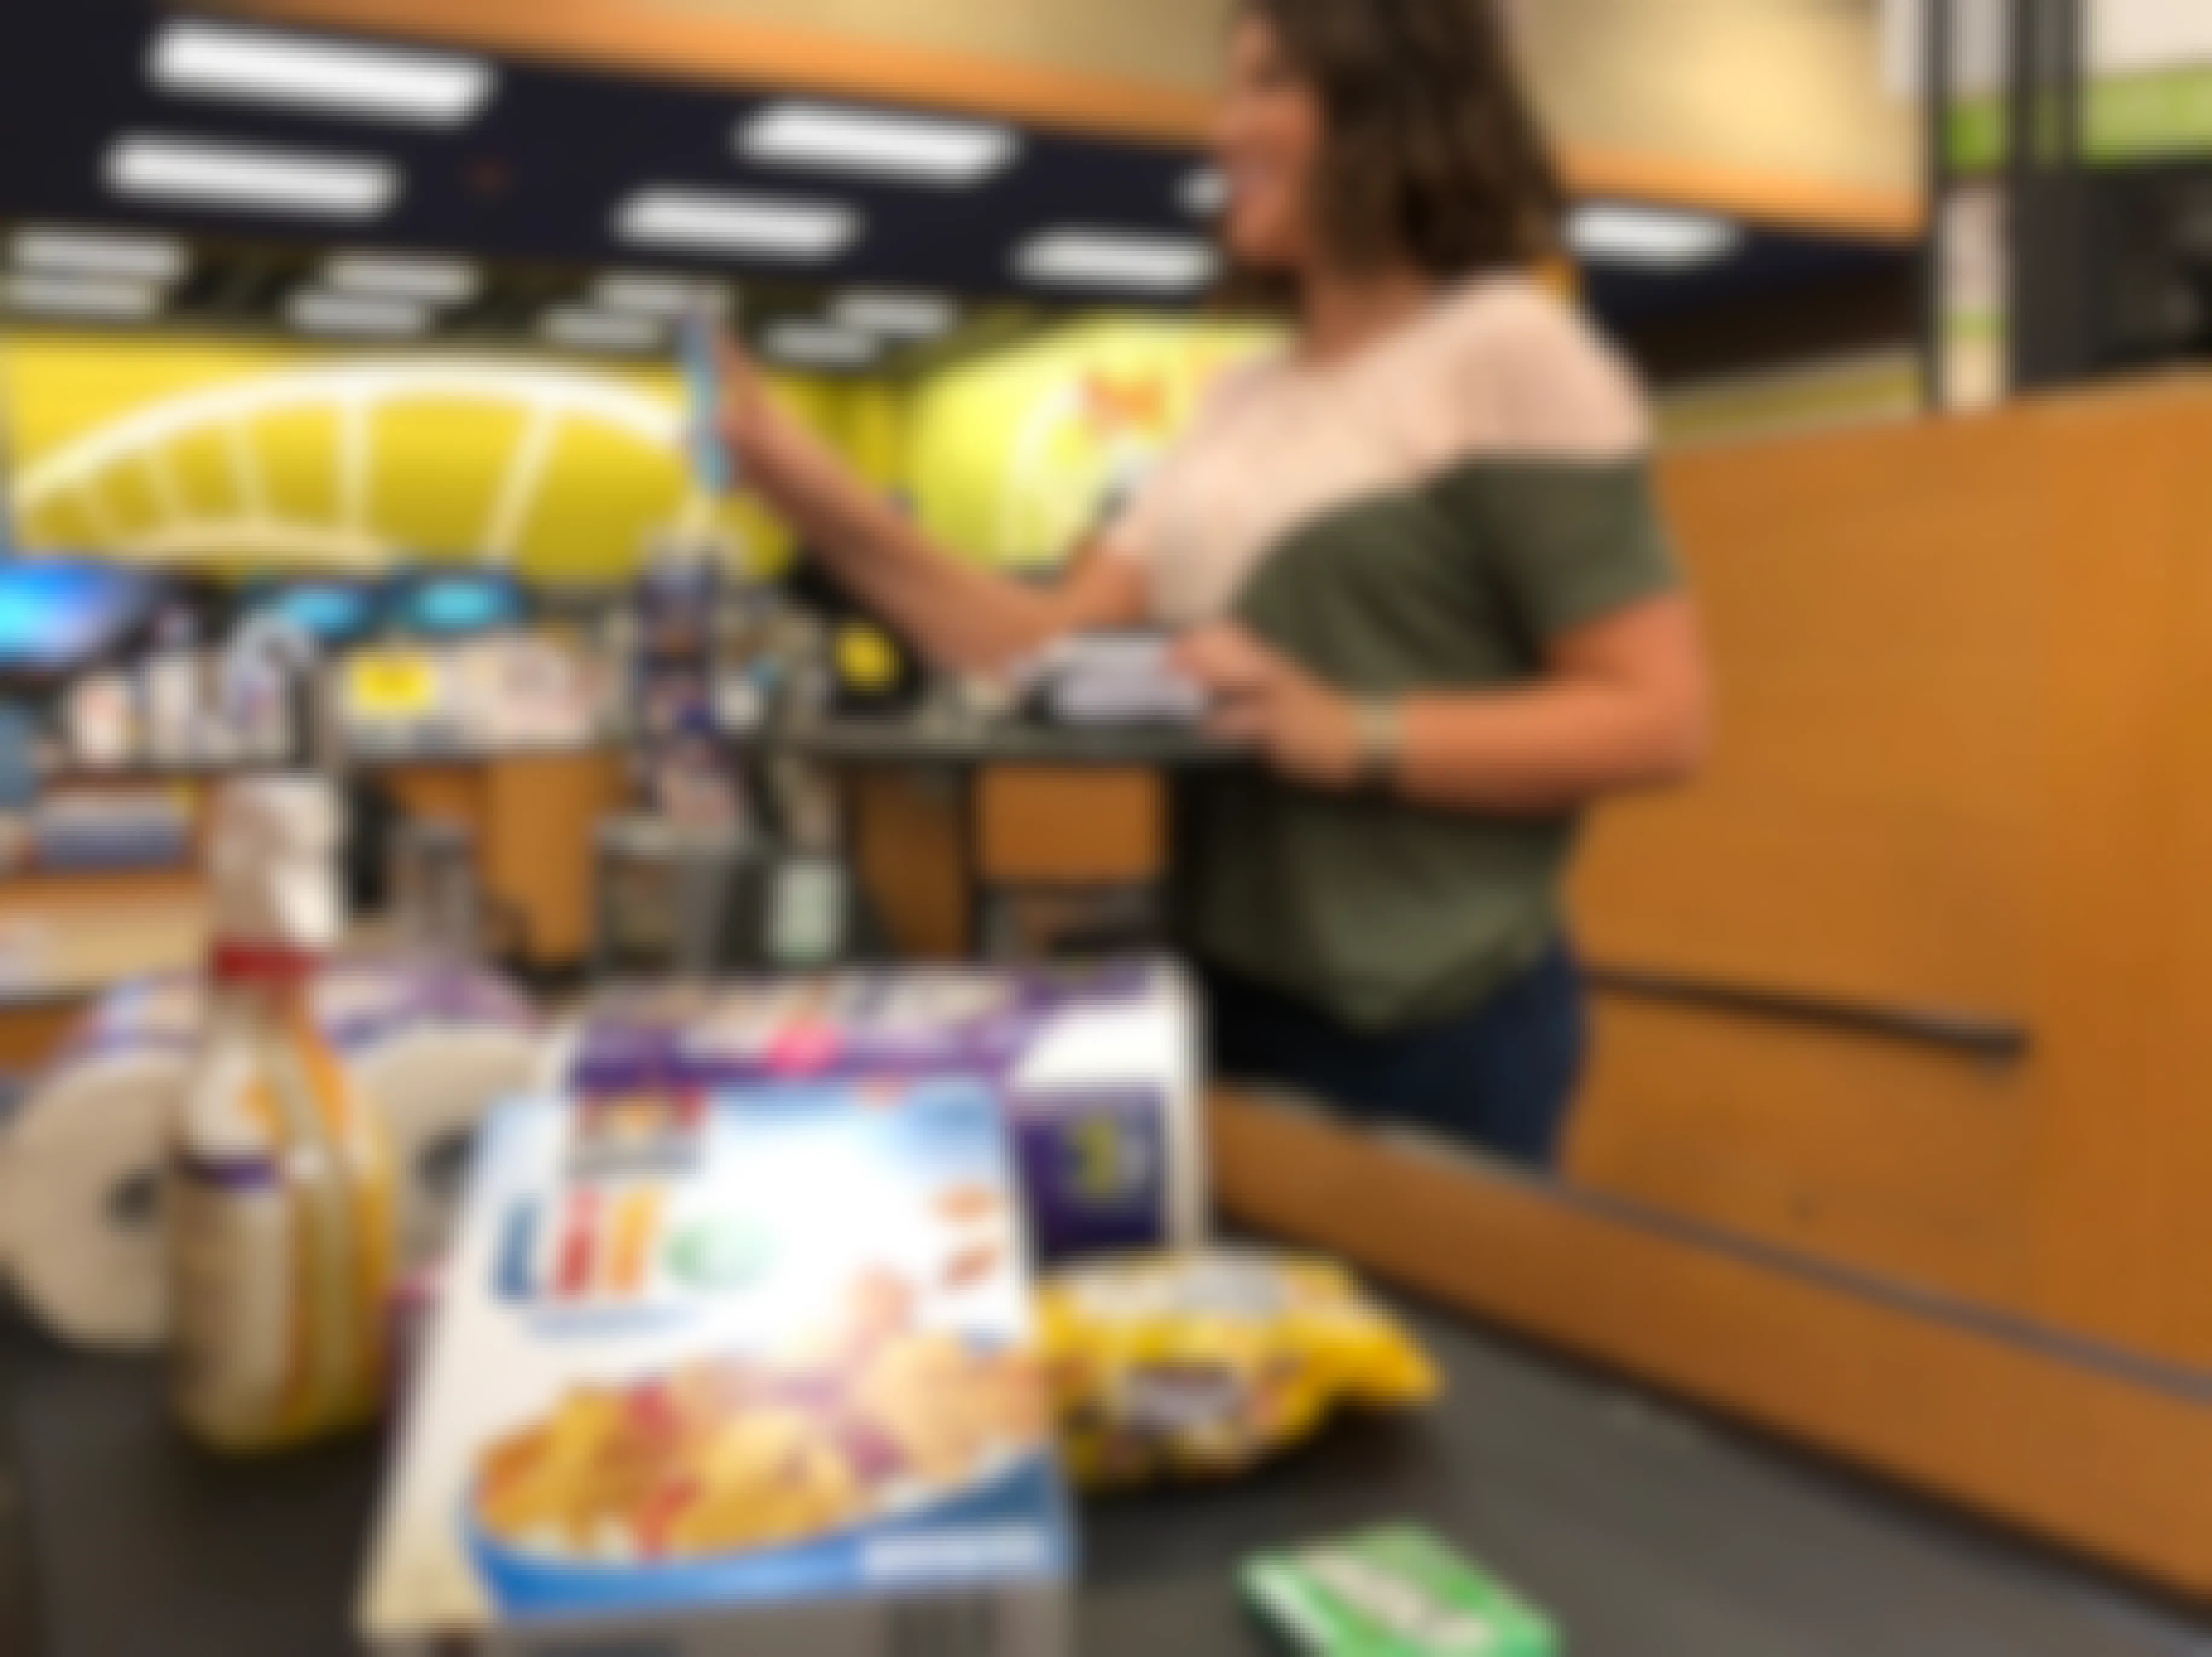 The Busy Mom's Guide to Couponing